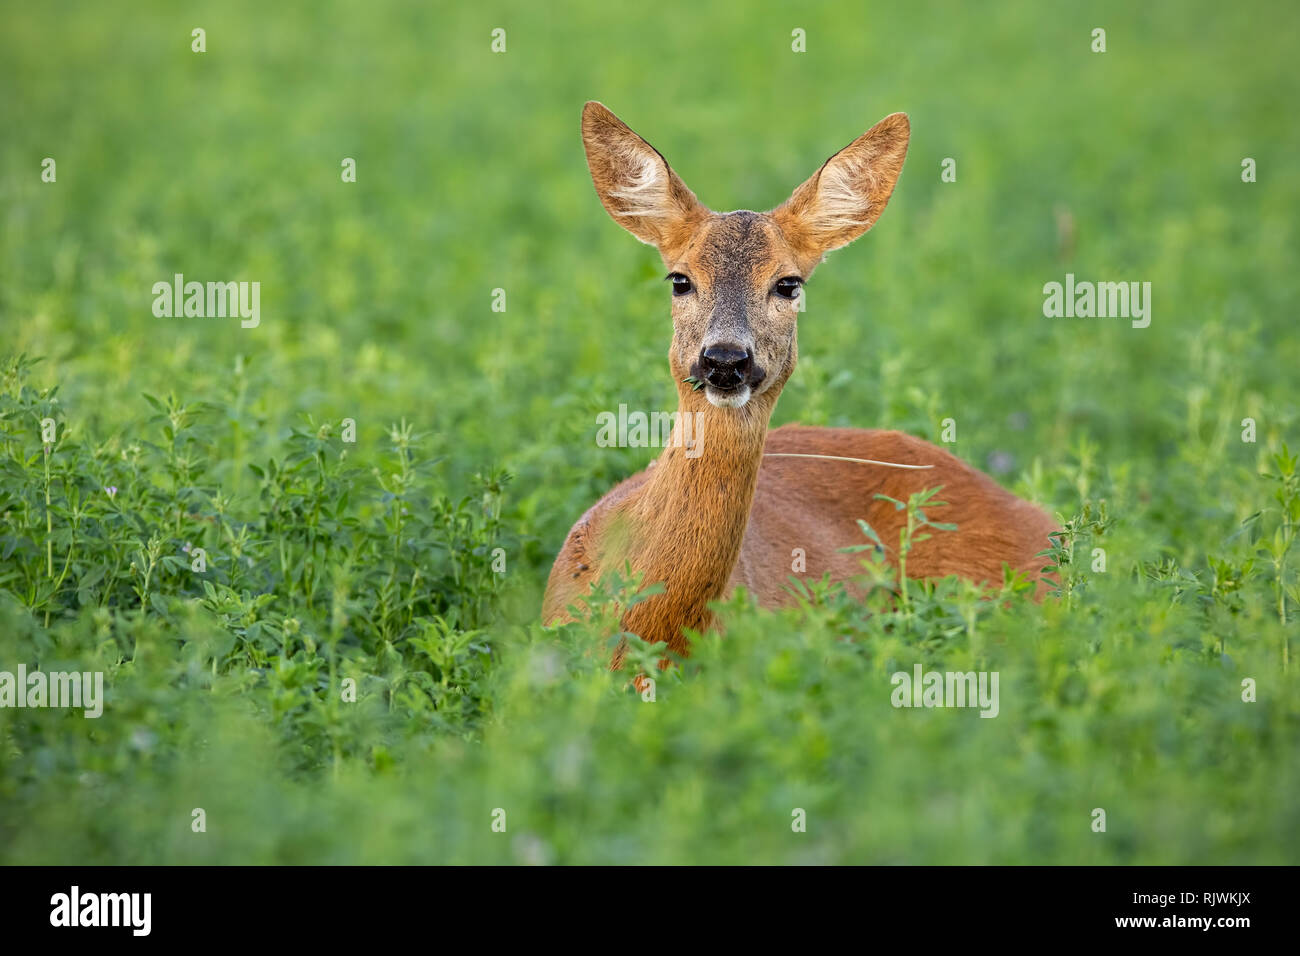 Roe deer doe standing out on clover field in summer Stock Photo